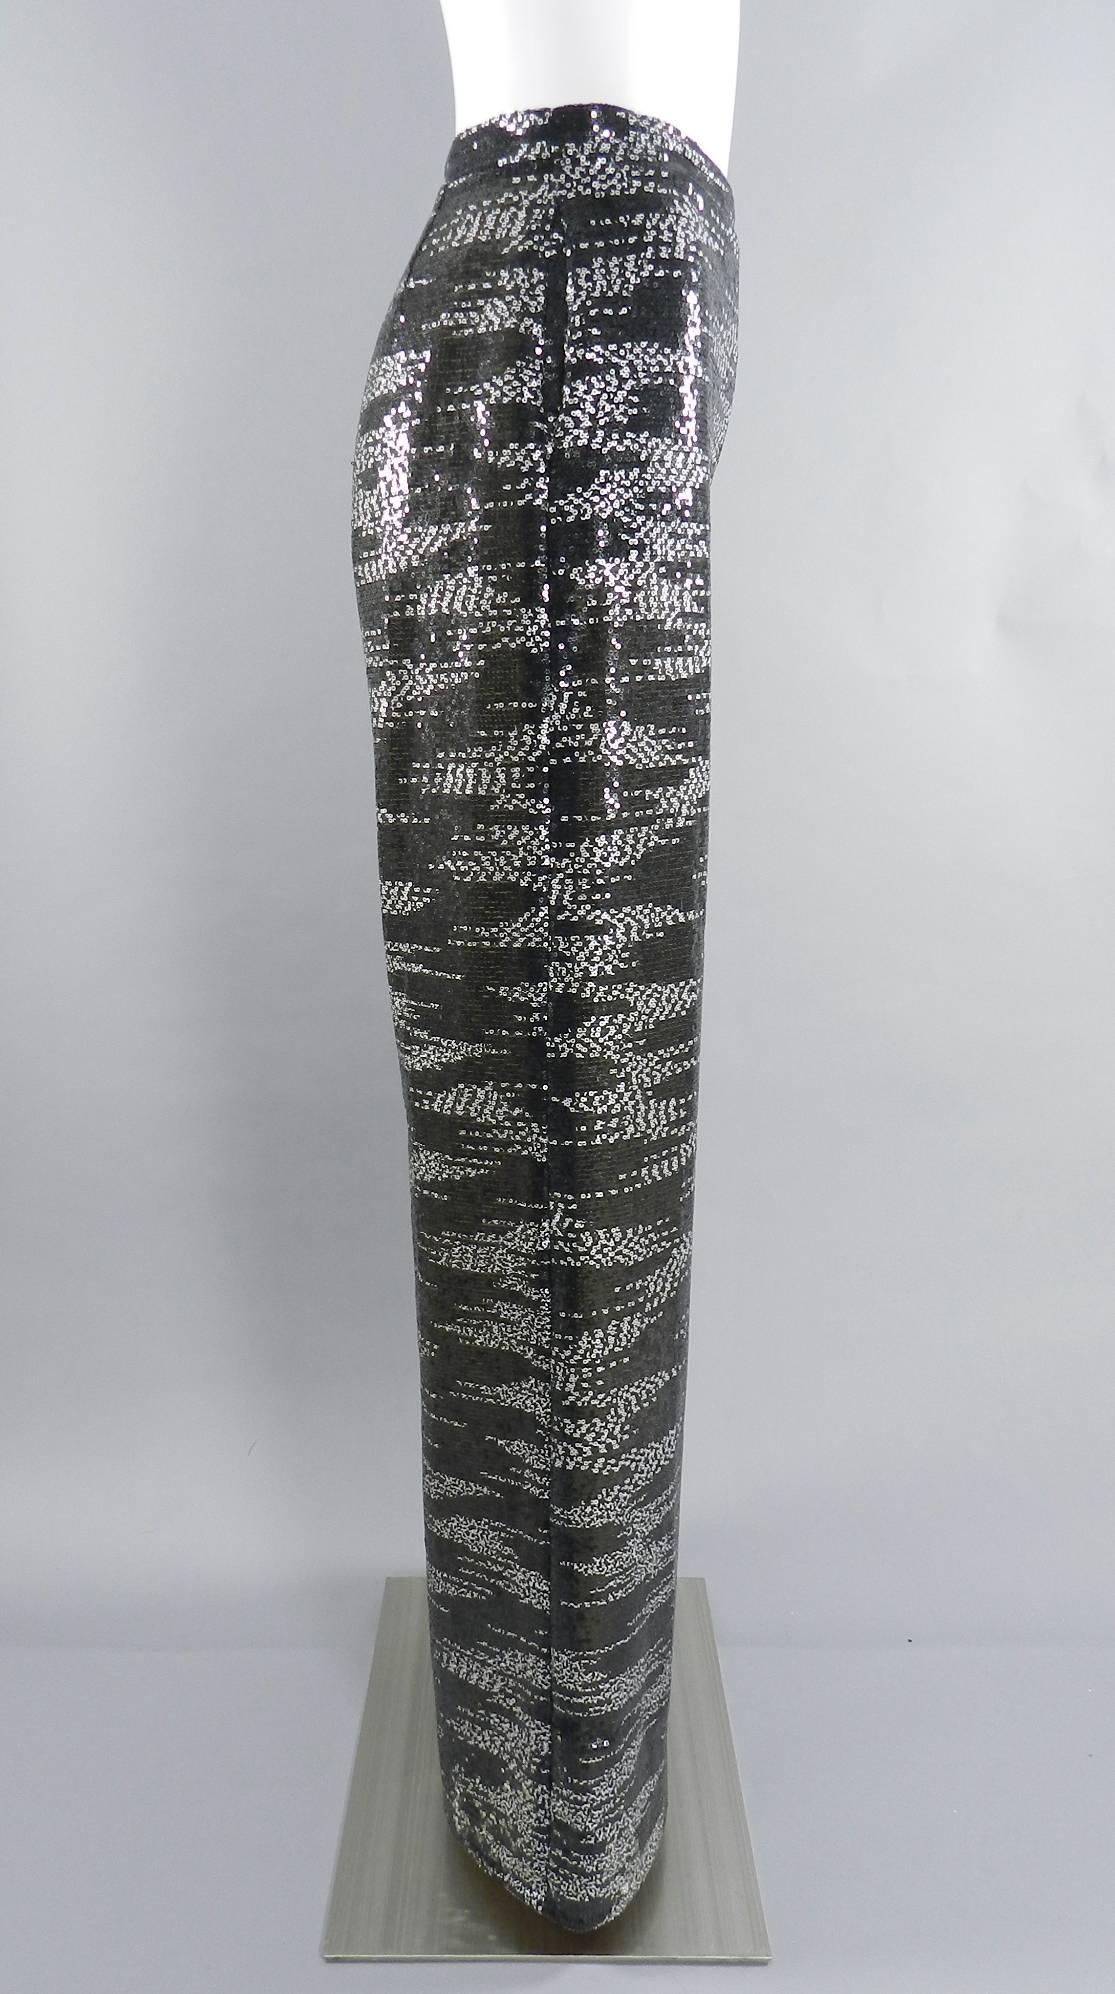 Chanel grey and white fully sequinned wide leg pants. 100% silk body with nude lining and lease sequins. Tagged size FR 36 (USA 4). Excellent condition.

Waist 27